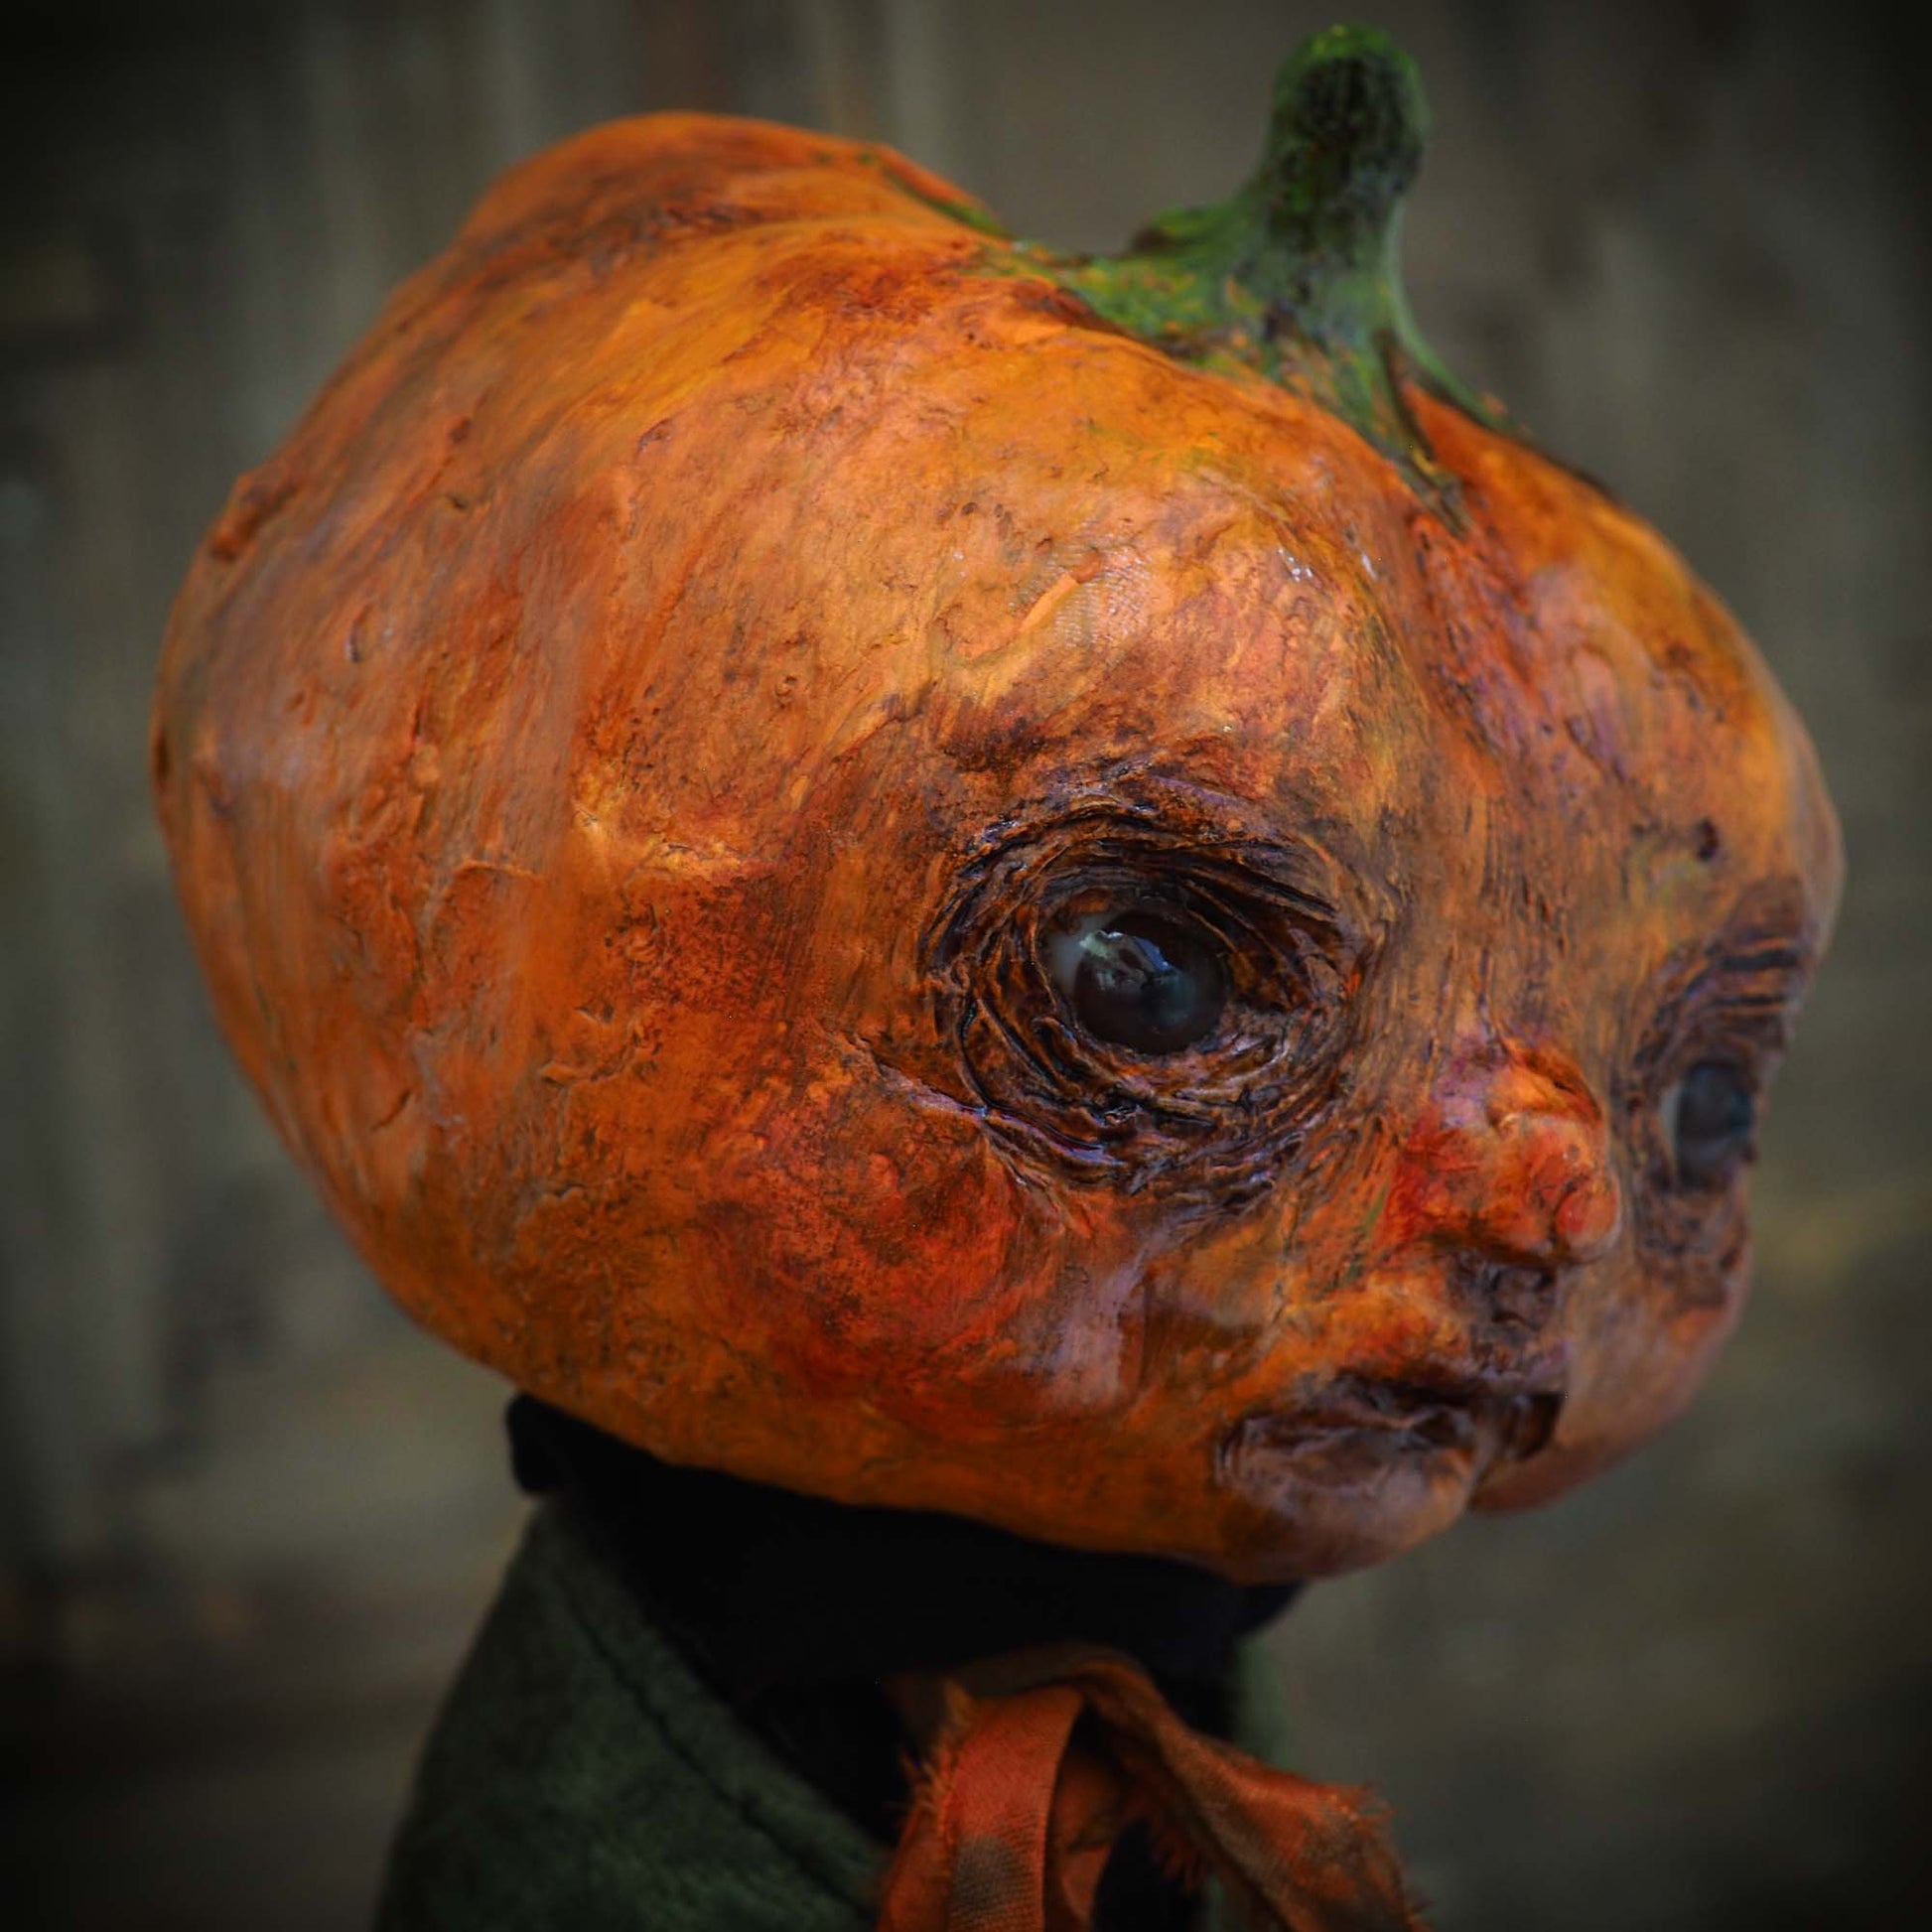 A witch transformed a boy into a Halloween pumpkin monster. This Danita original doll is a handmade jack-o-lantern soft sculpture as home decoration ornament. Carefully handmade with whimsical folk art roots, the spooky ghosts, witches, vampires, ghouls, and jack-o-lantern art dolls of Danita are full of mystery lore.